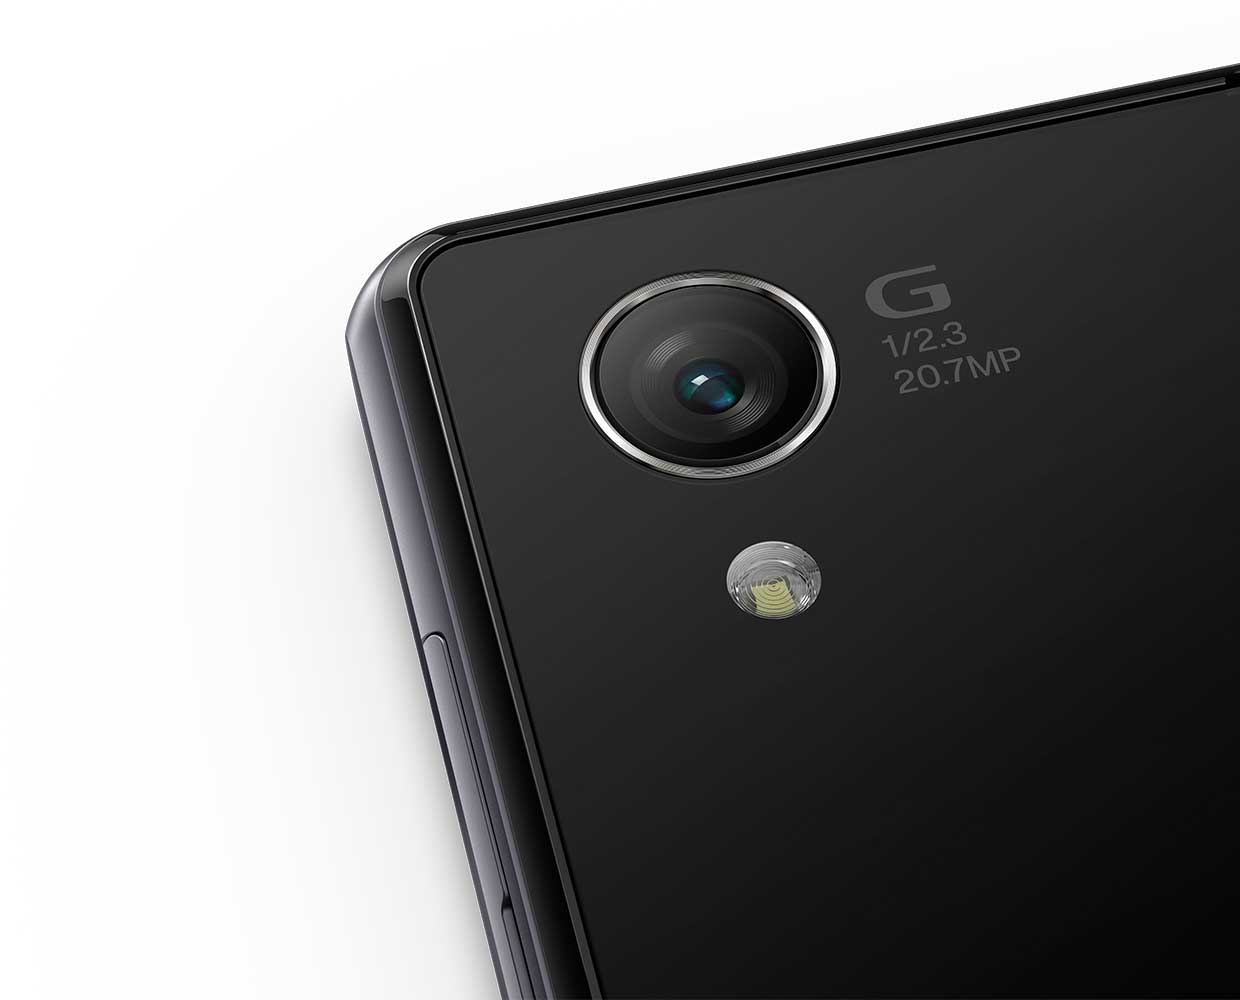 Xperia Z1 achieves superior image quality with sharper pictures, using Sony’s award-winning G Lens.